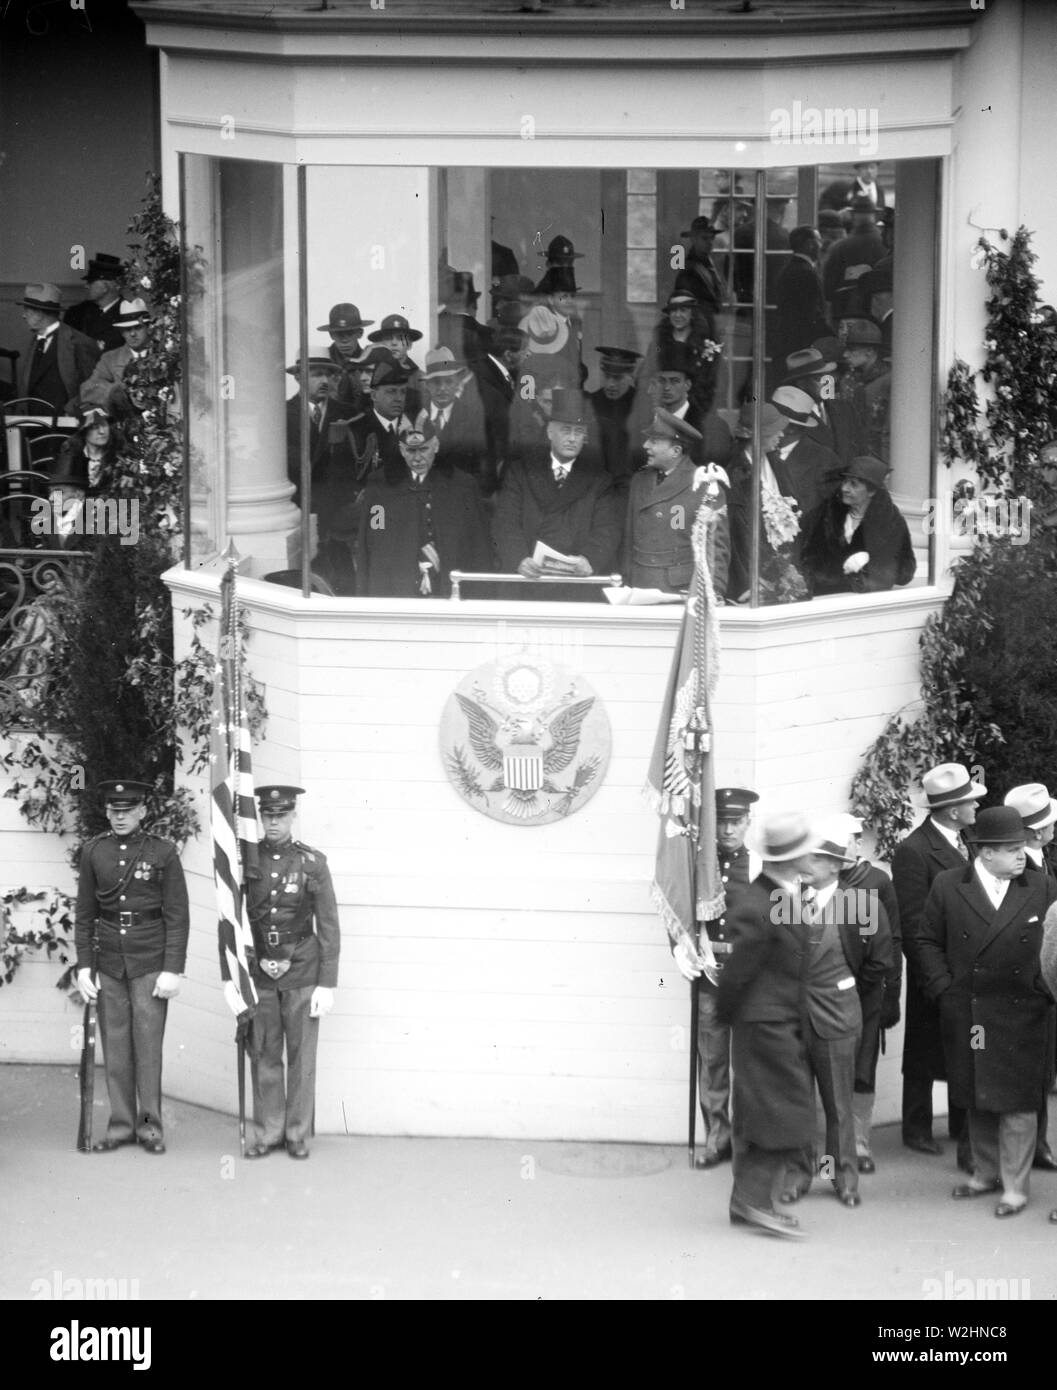 Franklin D. Roosevelt - Franklin D. Roosevelt inauguration. Parade viewing stand. Washington, D.C. March 4, 1933 Stock Photo